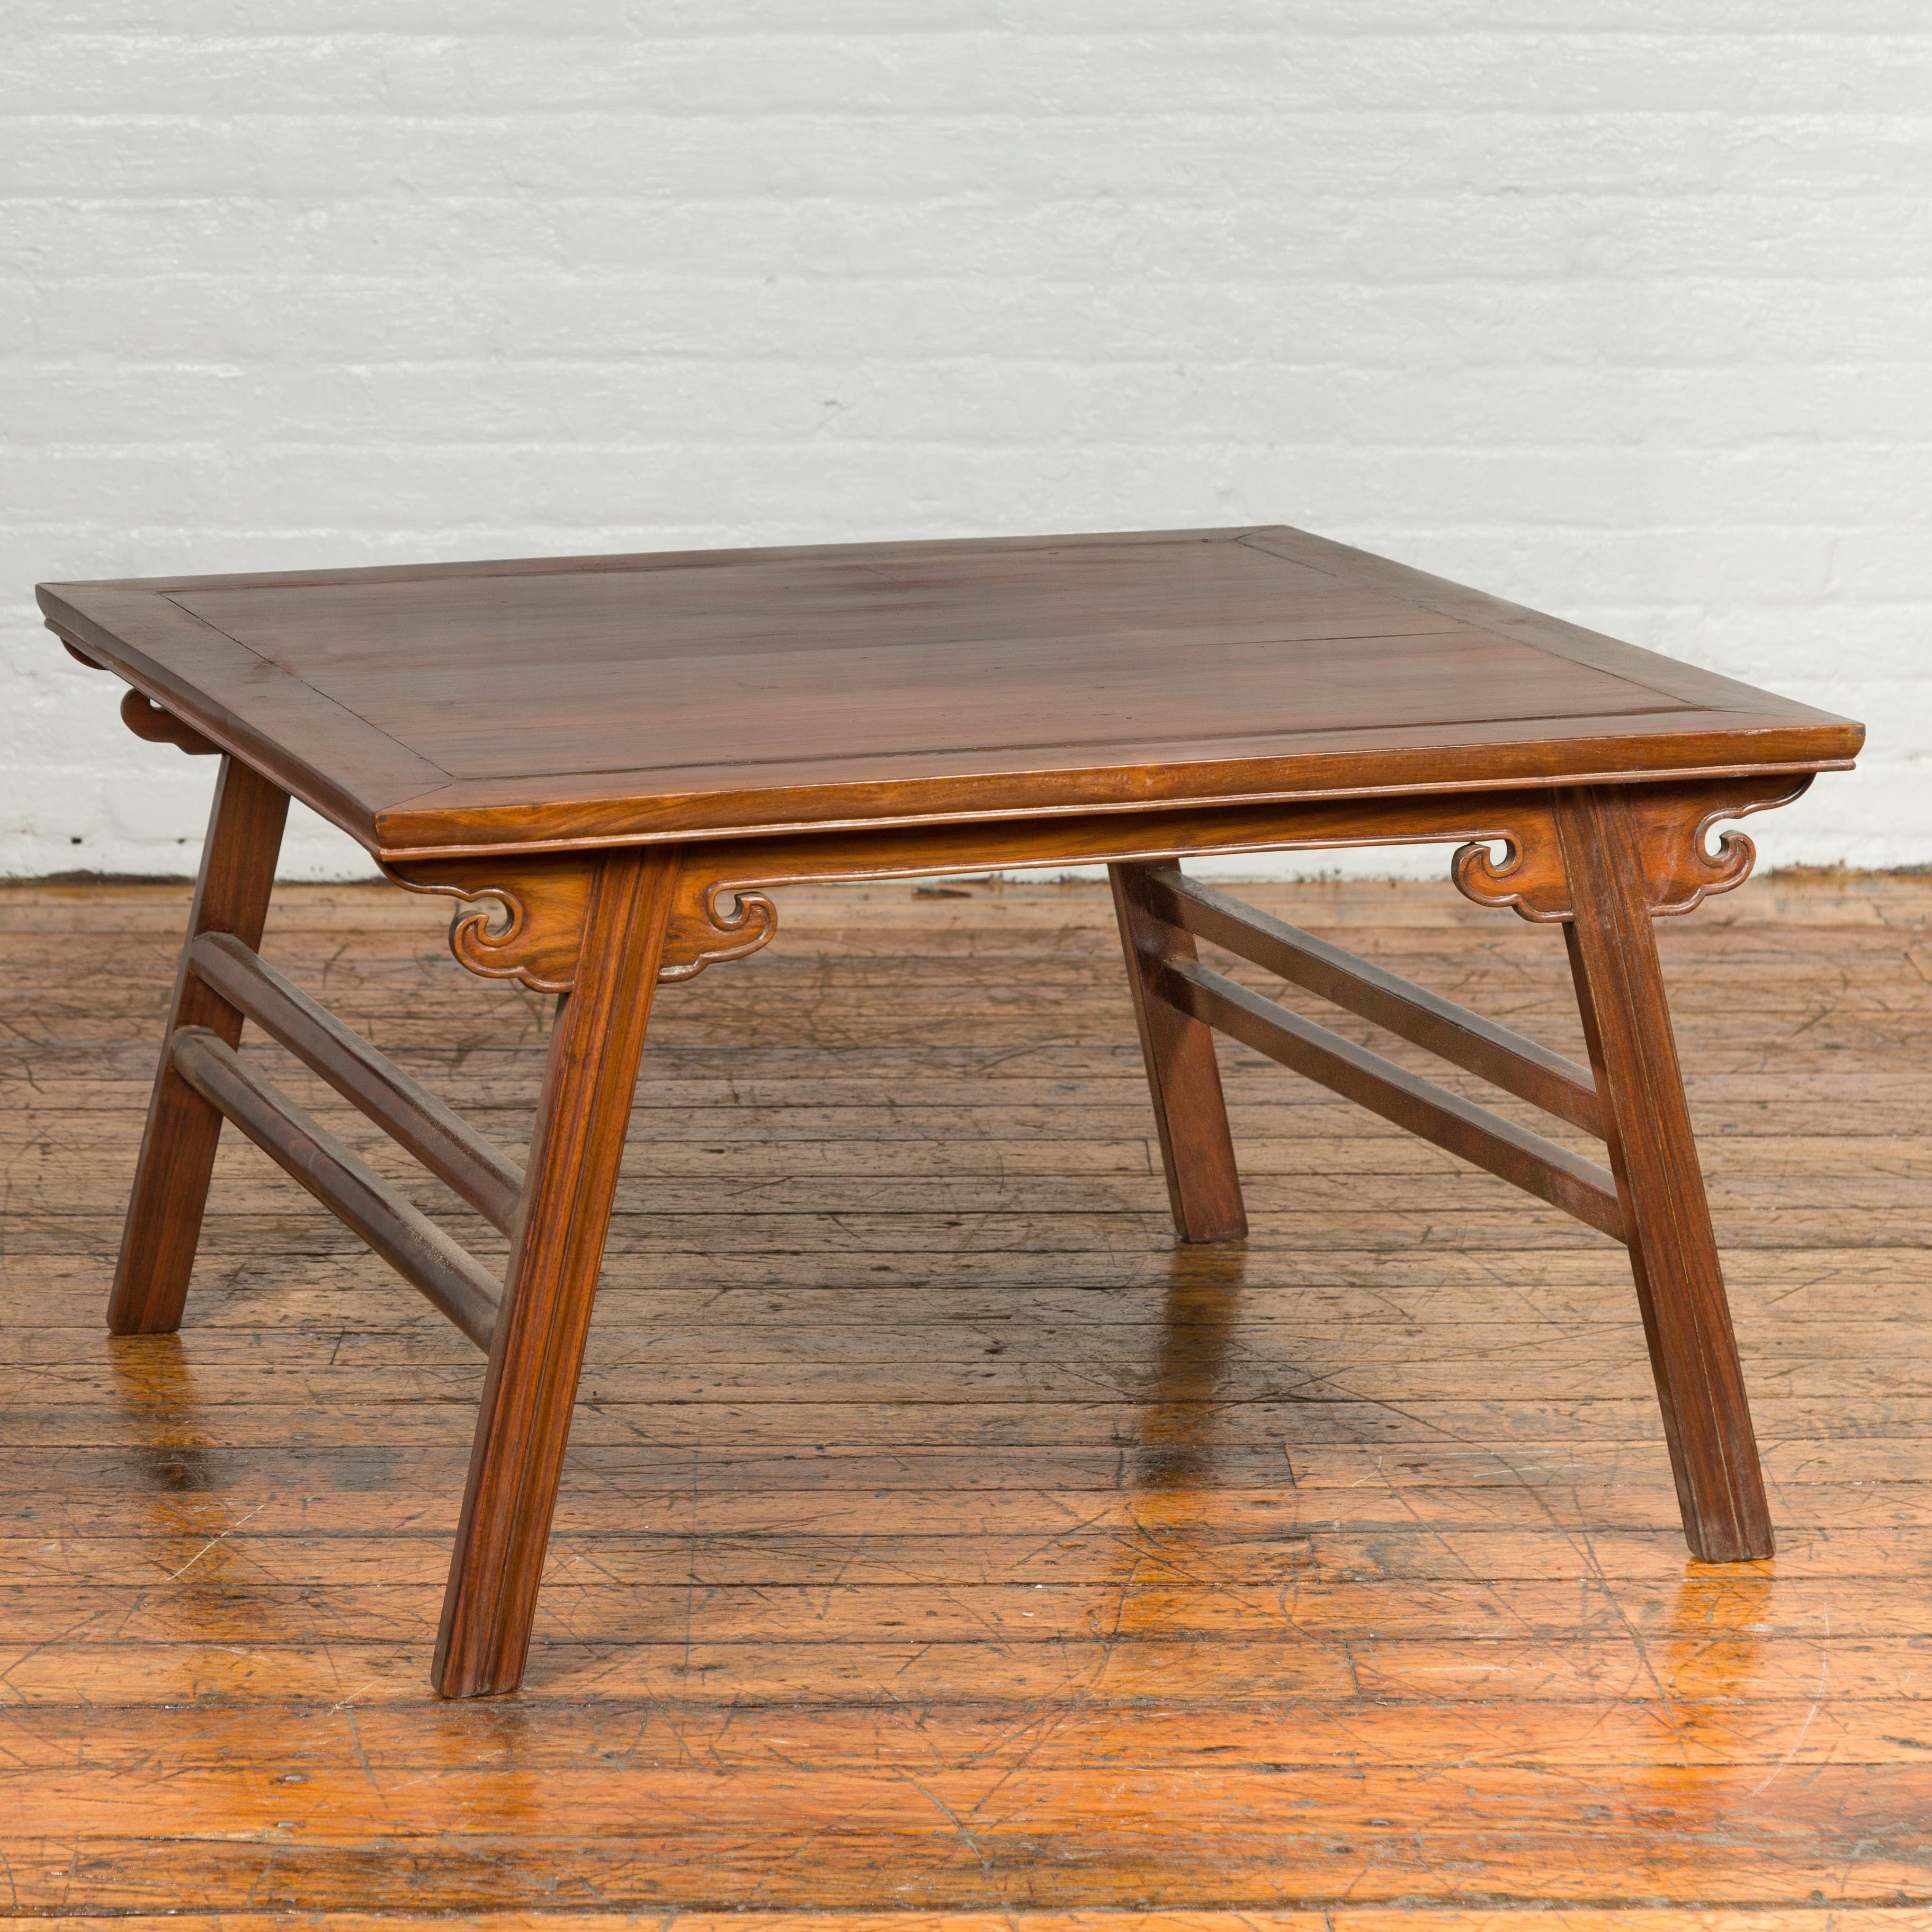 A vintage Chinese Ming Dynasty style elmwood coffee table from the mid-20th century, with carved spandrels and splaying legs. Born in China during the midcentury period, this vintage Ming style elm coffee table features a rectangular top with